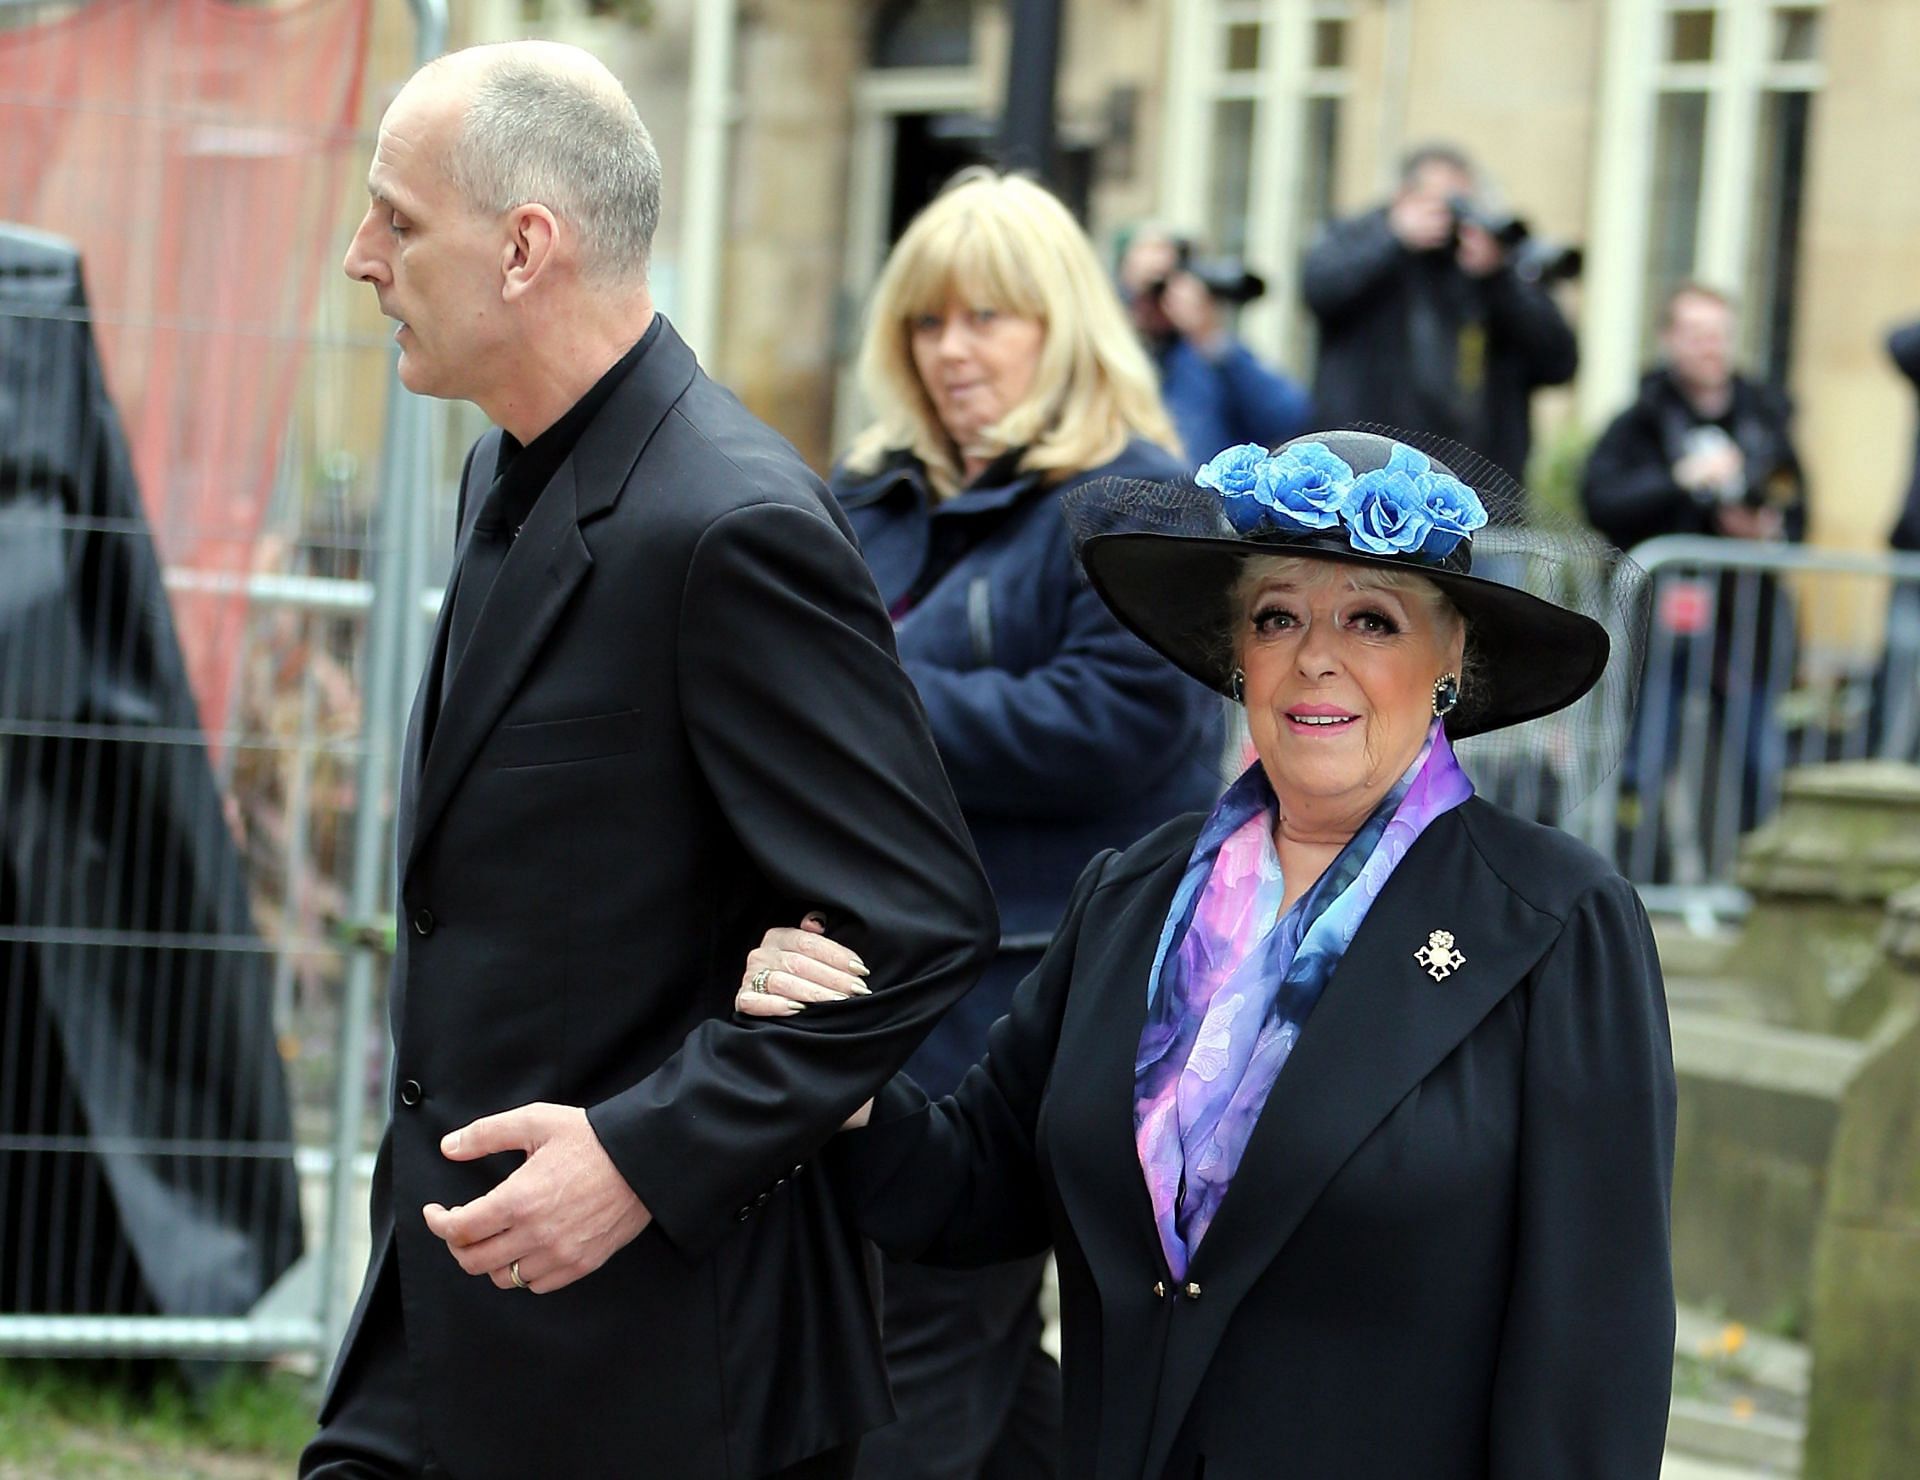 Julie Goodyear and Scott Brand married in 2007 (Image via Getty)